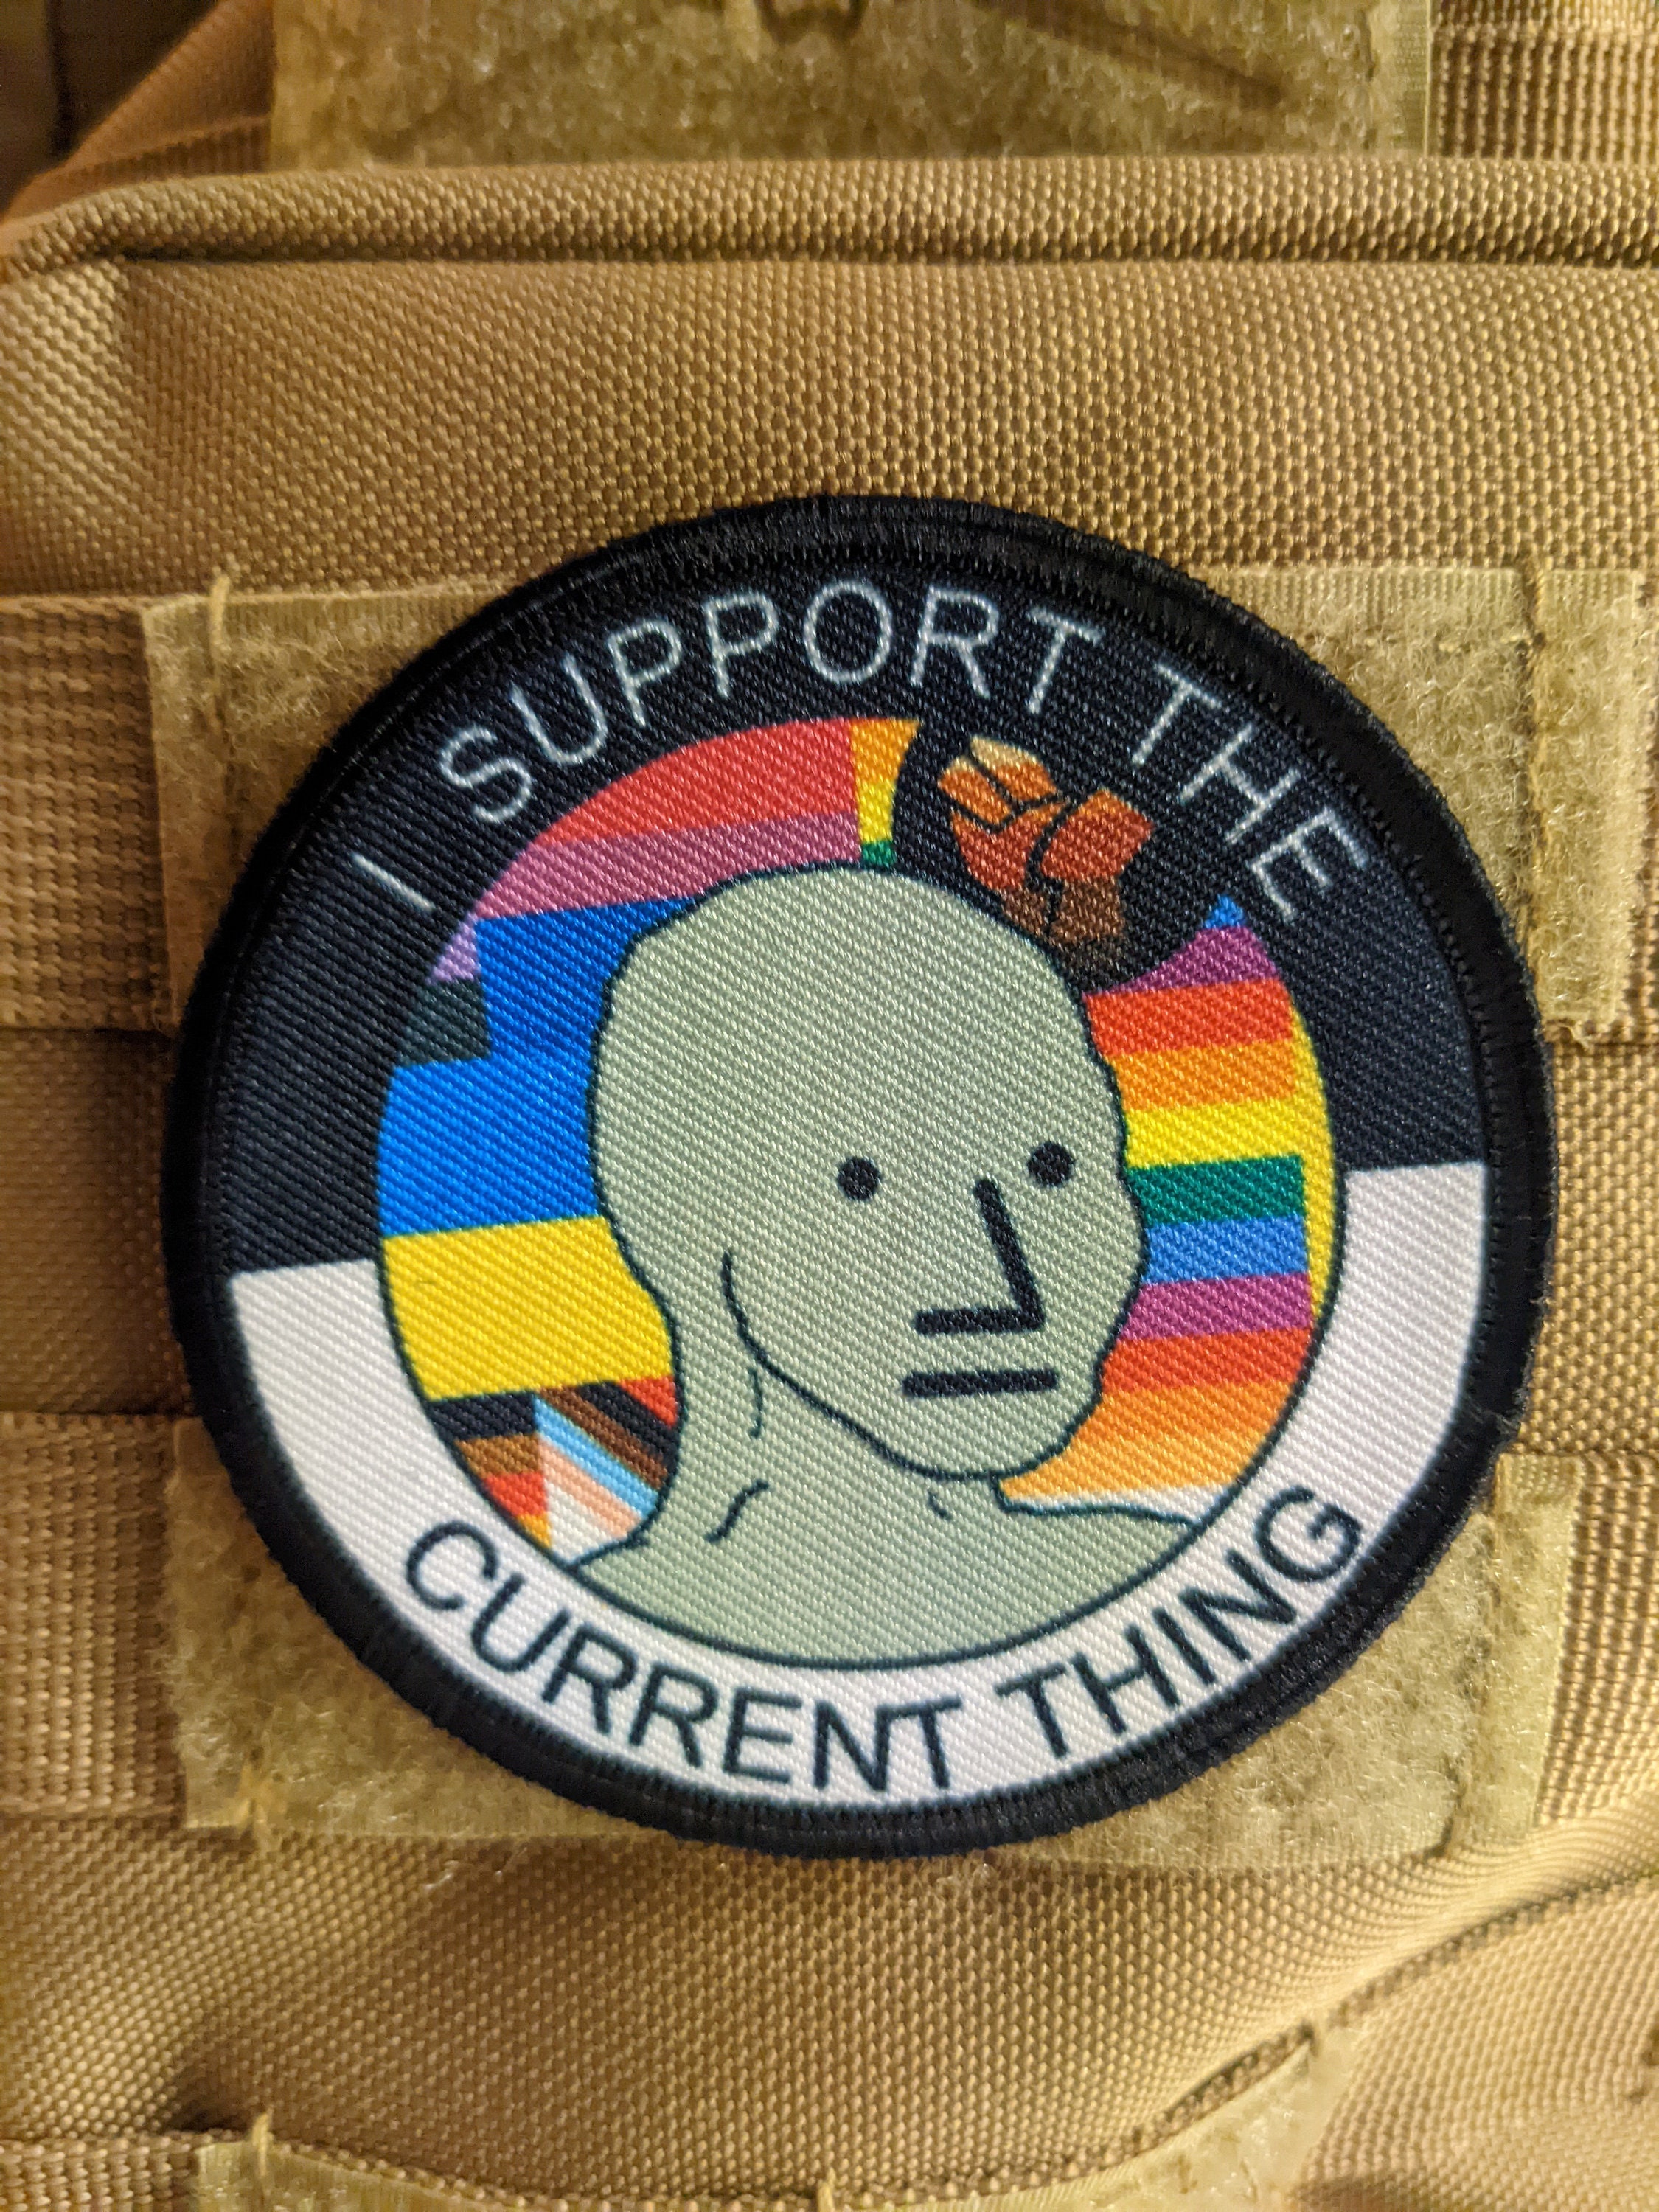 Bearded Chad Meme yes 2x3 Morale Patch 